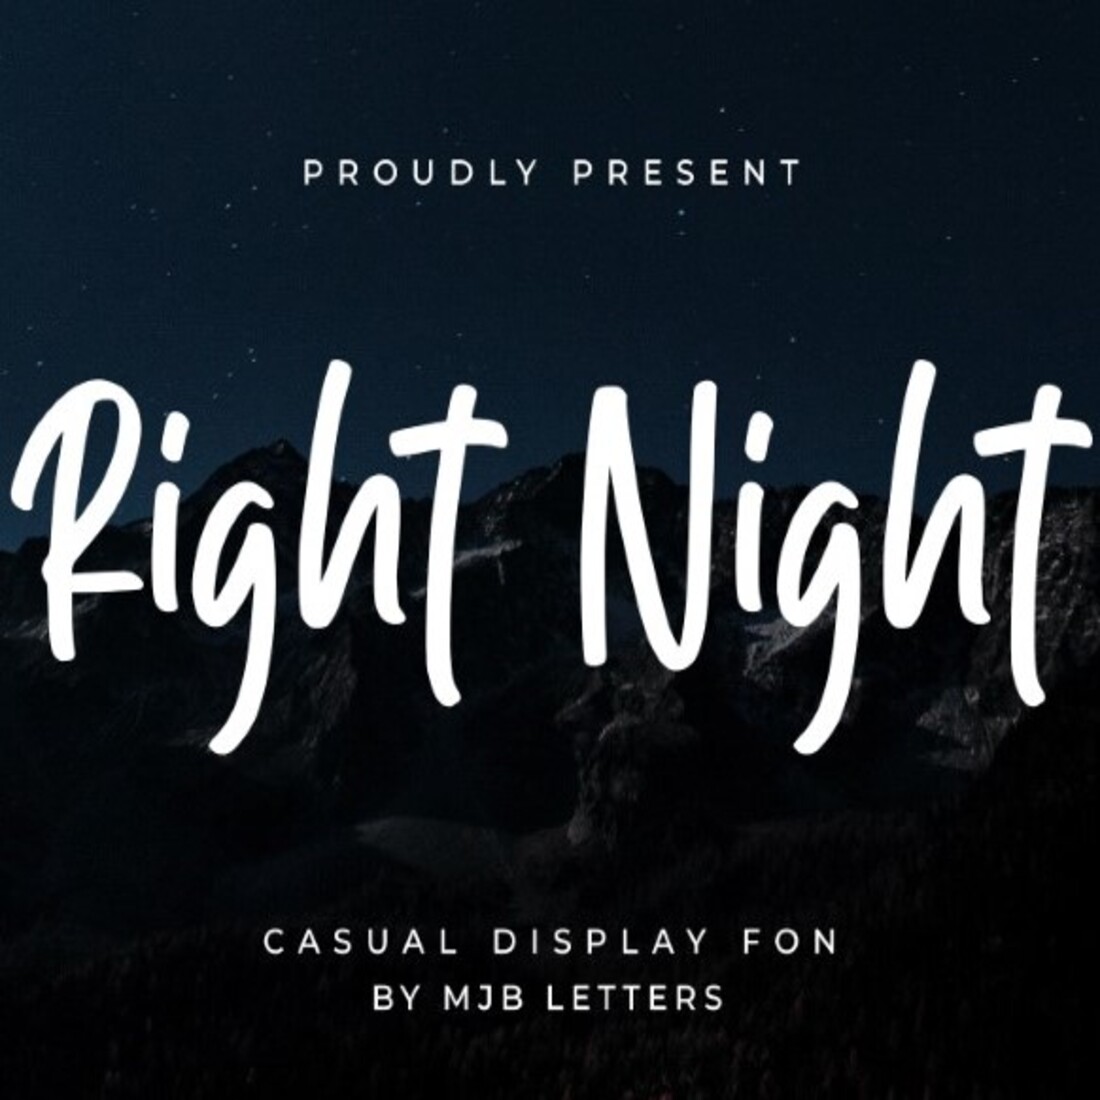 Right Nignt Display Font cover image.